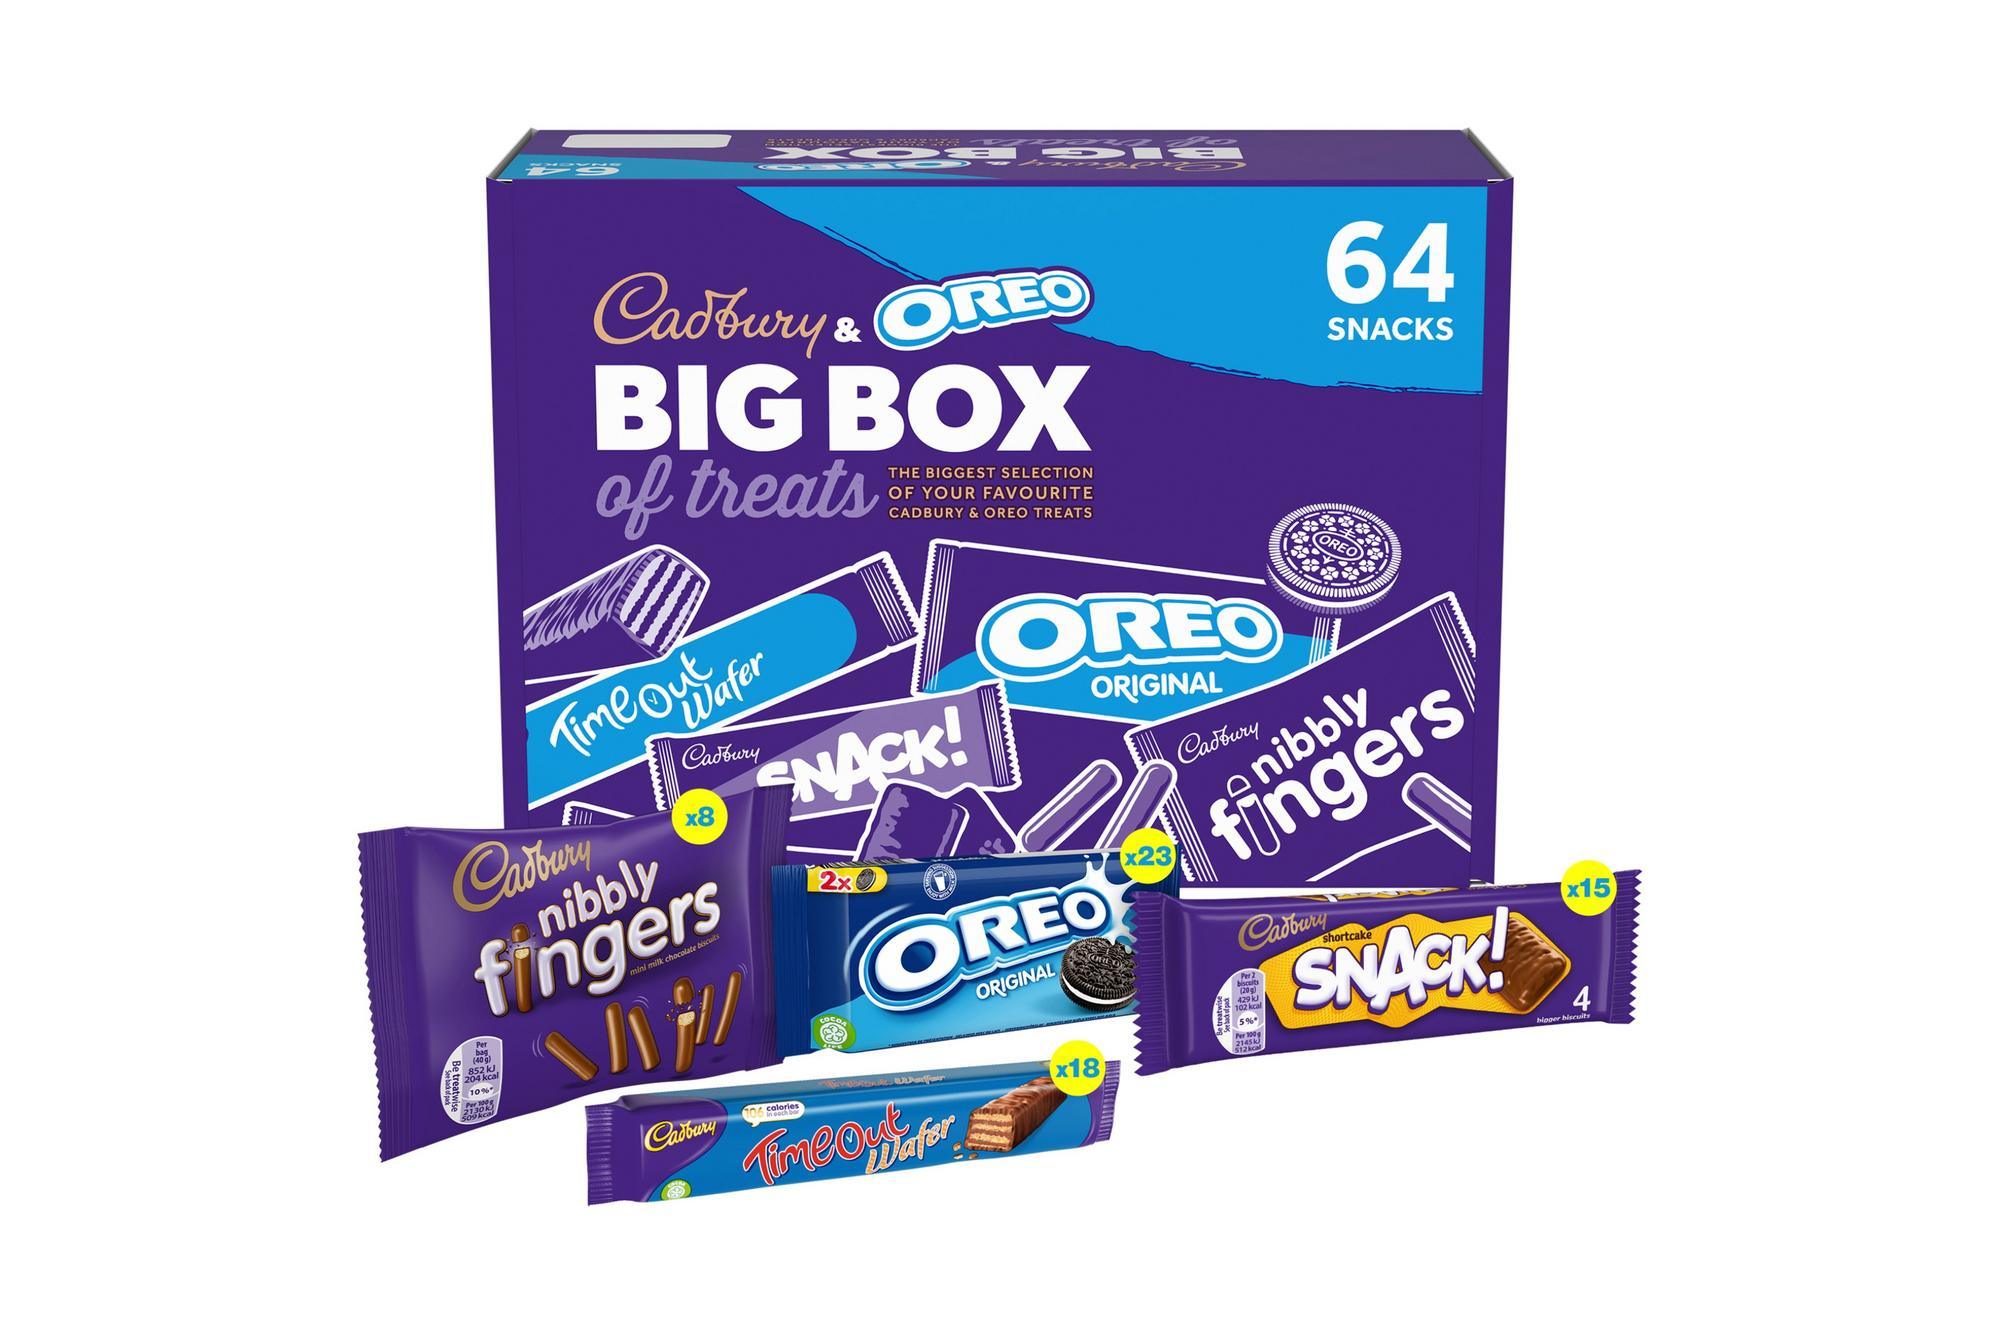 Cadbury & OREO Biscuit Big Box of Treats - 64 Individually Wrapped Biscuit Portion Packs - Vending Superstore